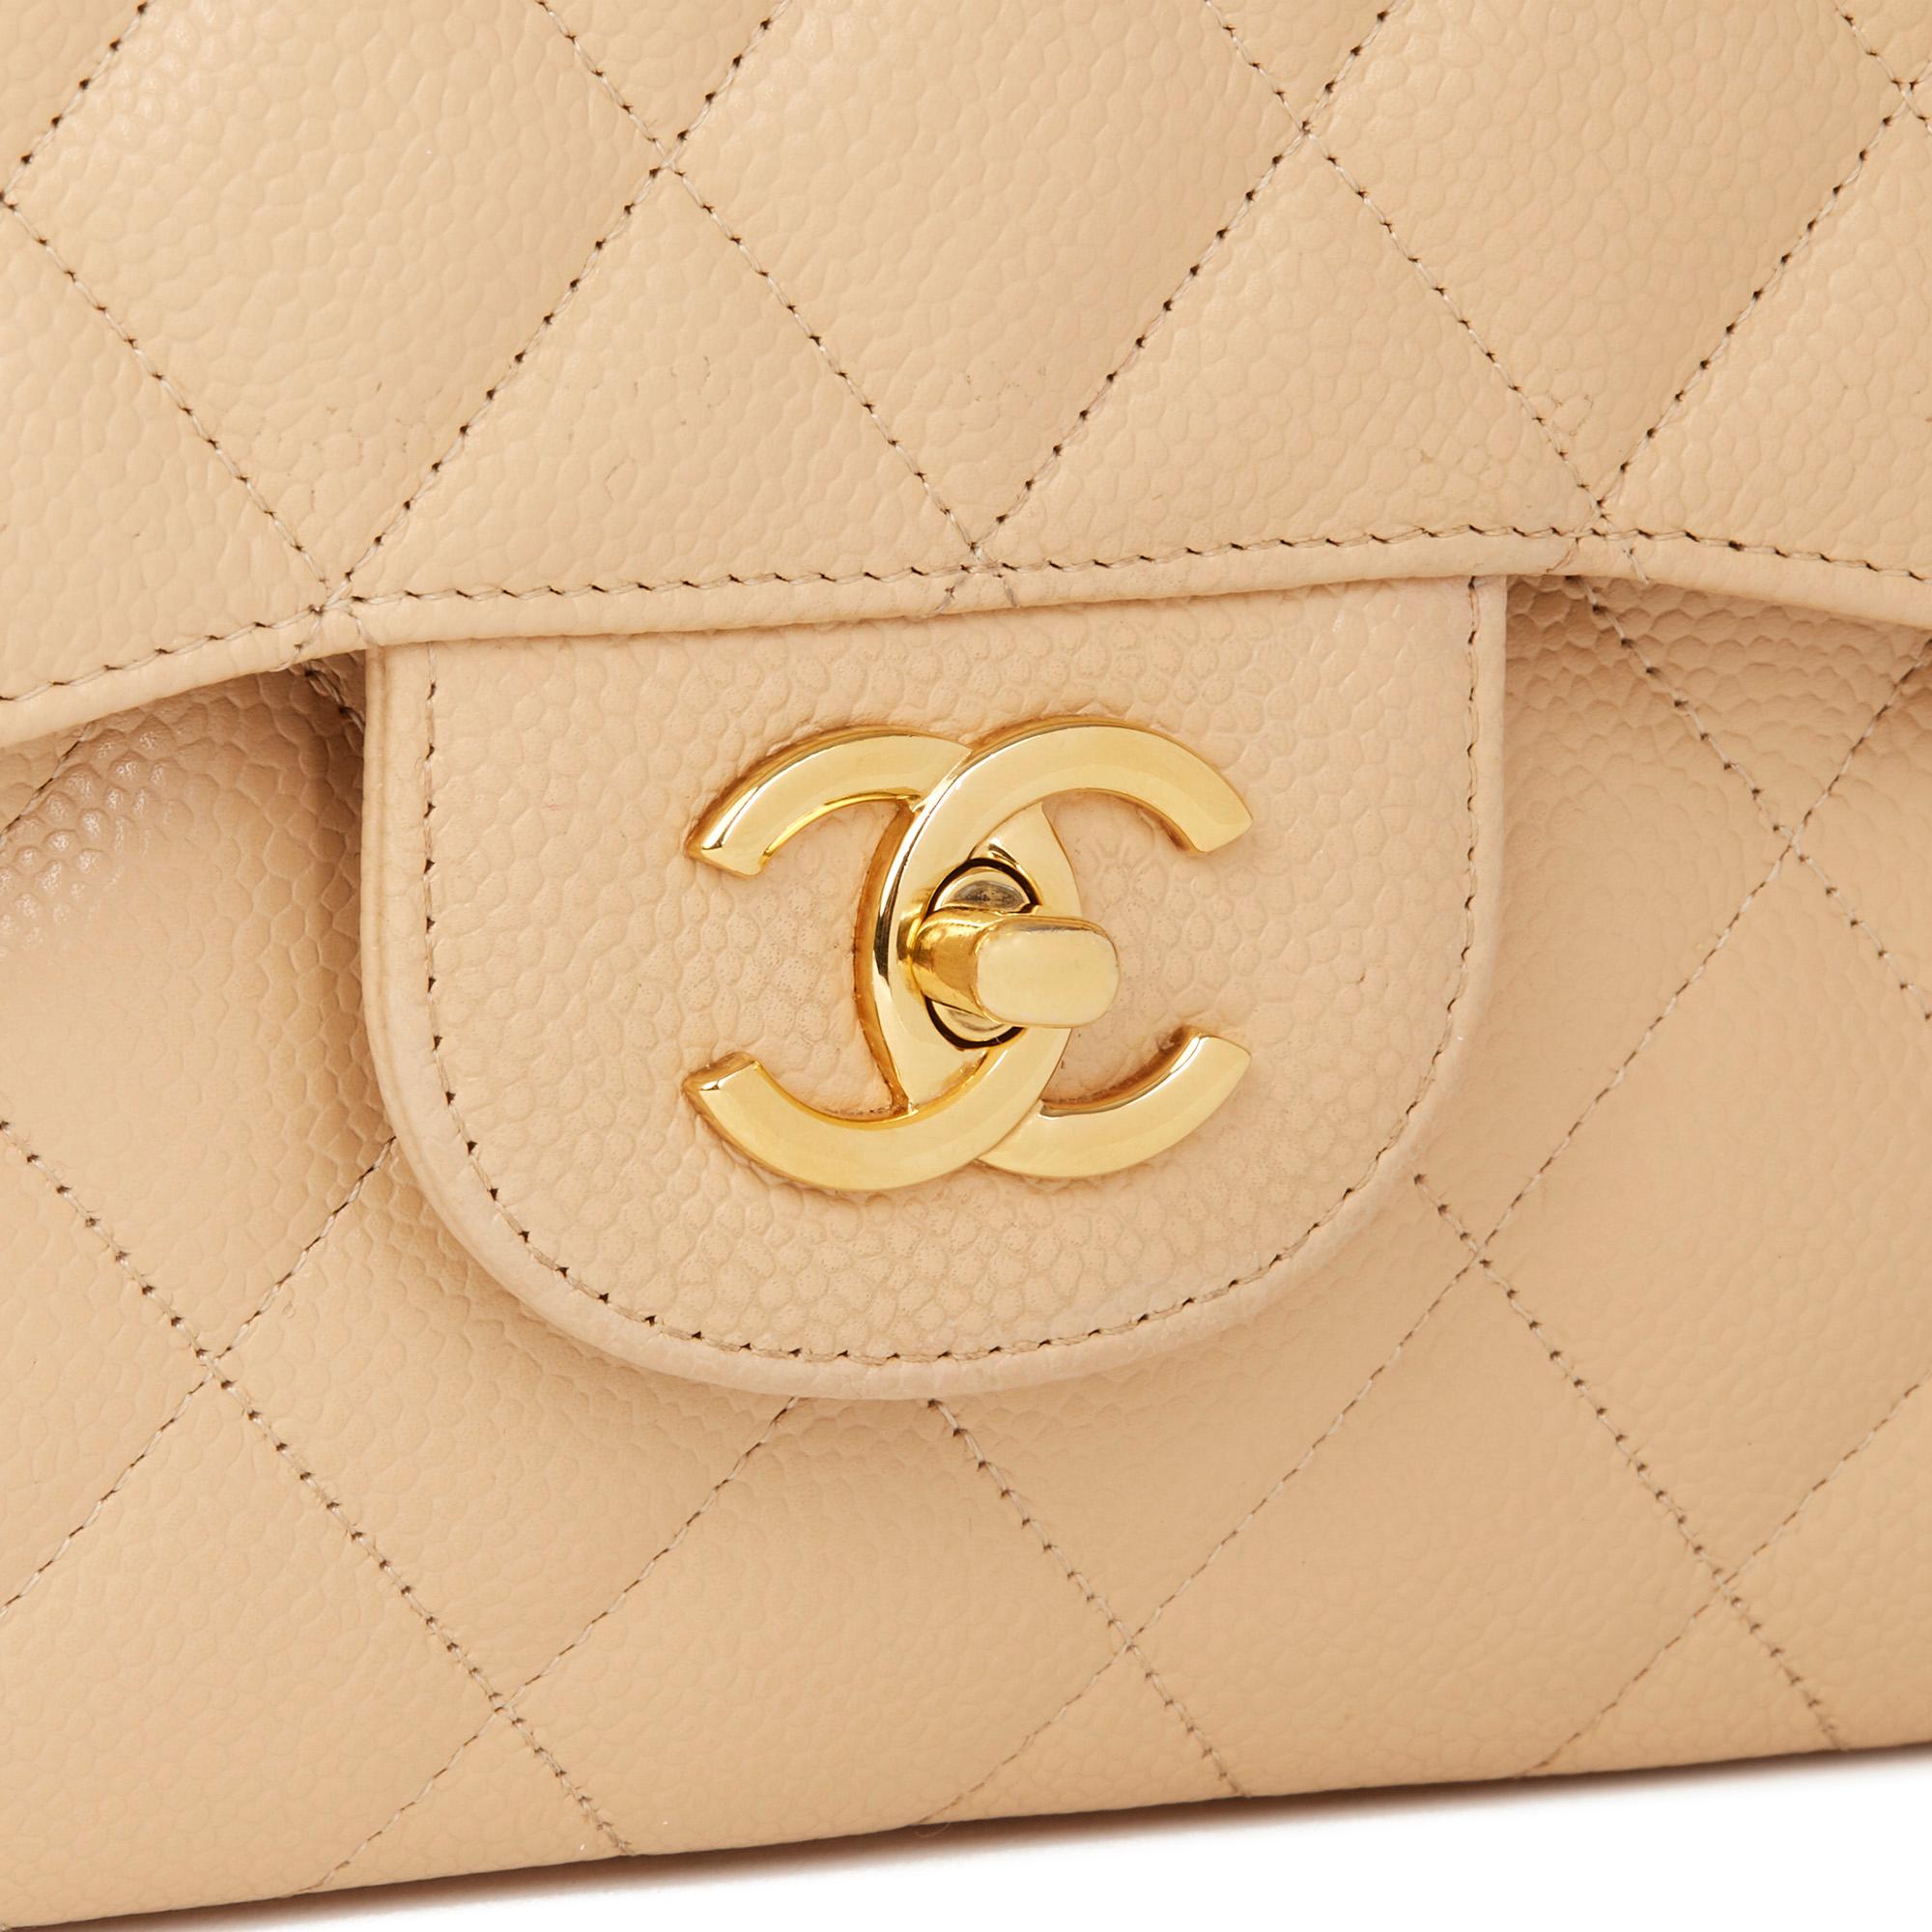 2013 Chanel Beige Quilted Caviar Leather Jumbo Classic Double Flap Bag 1